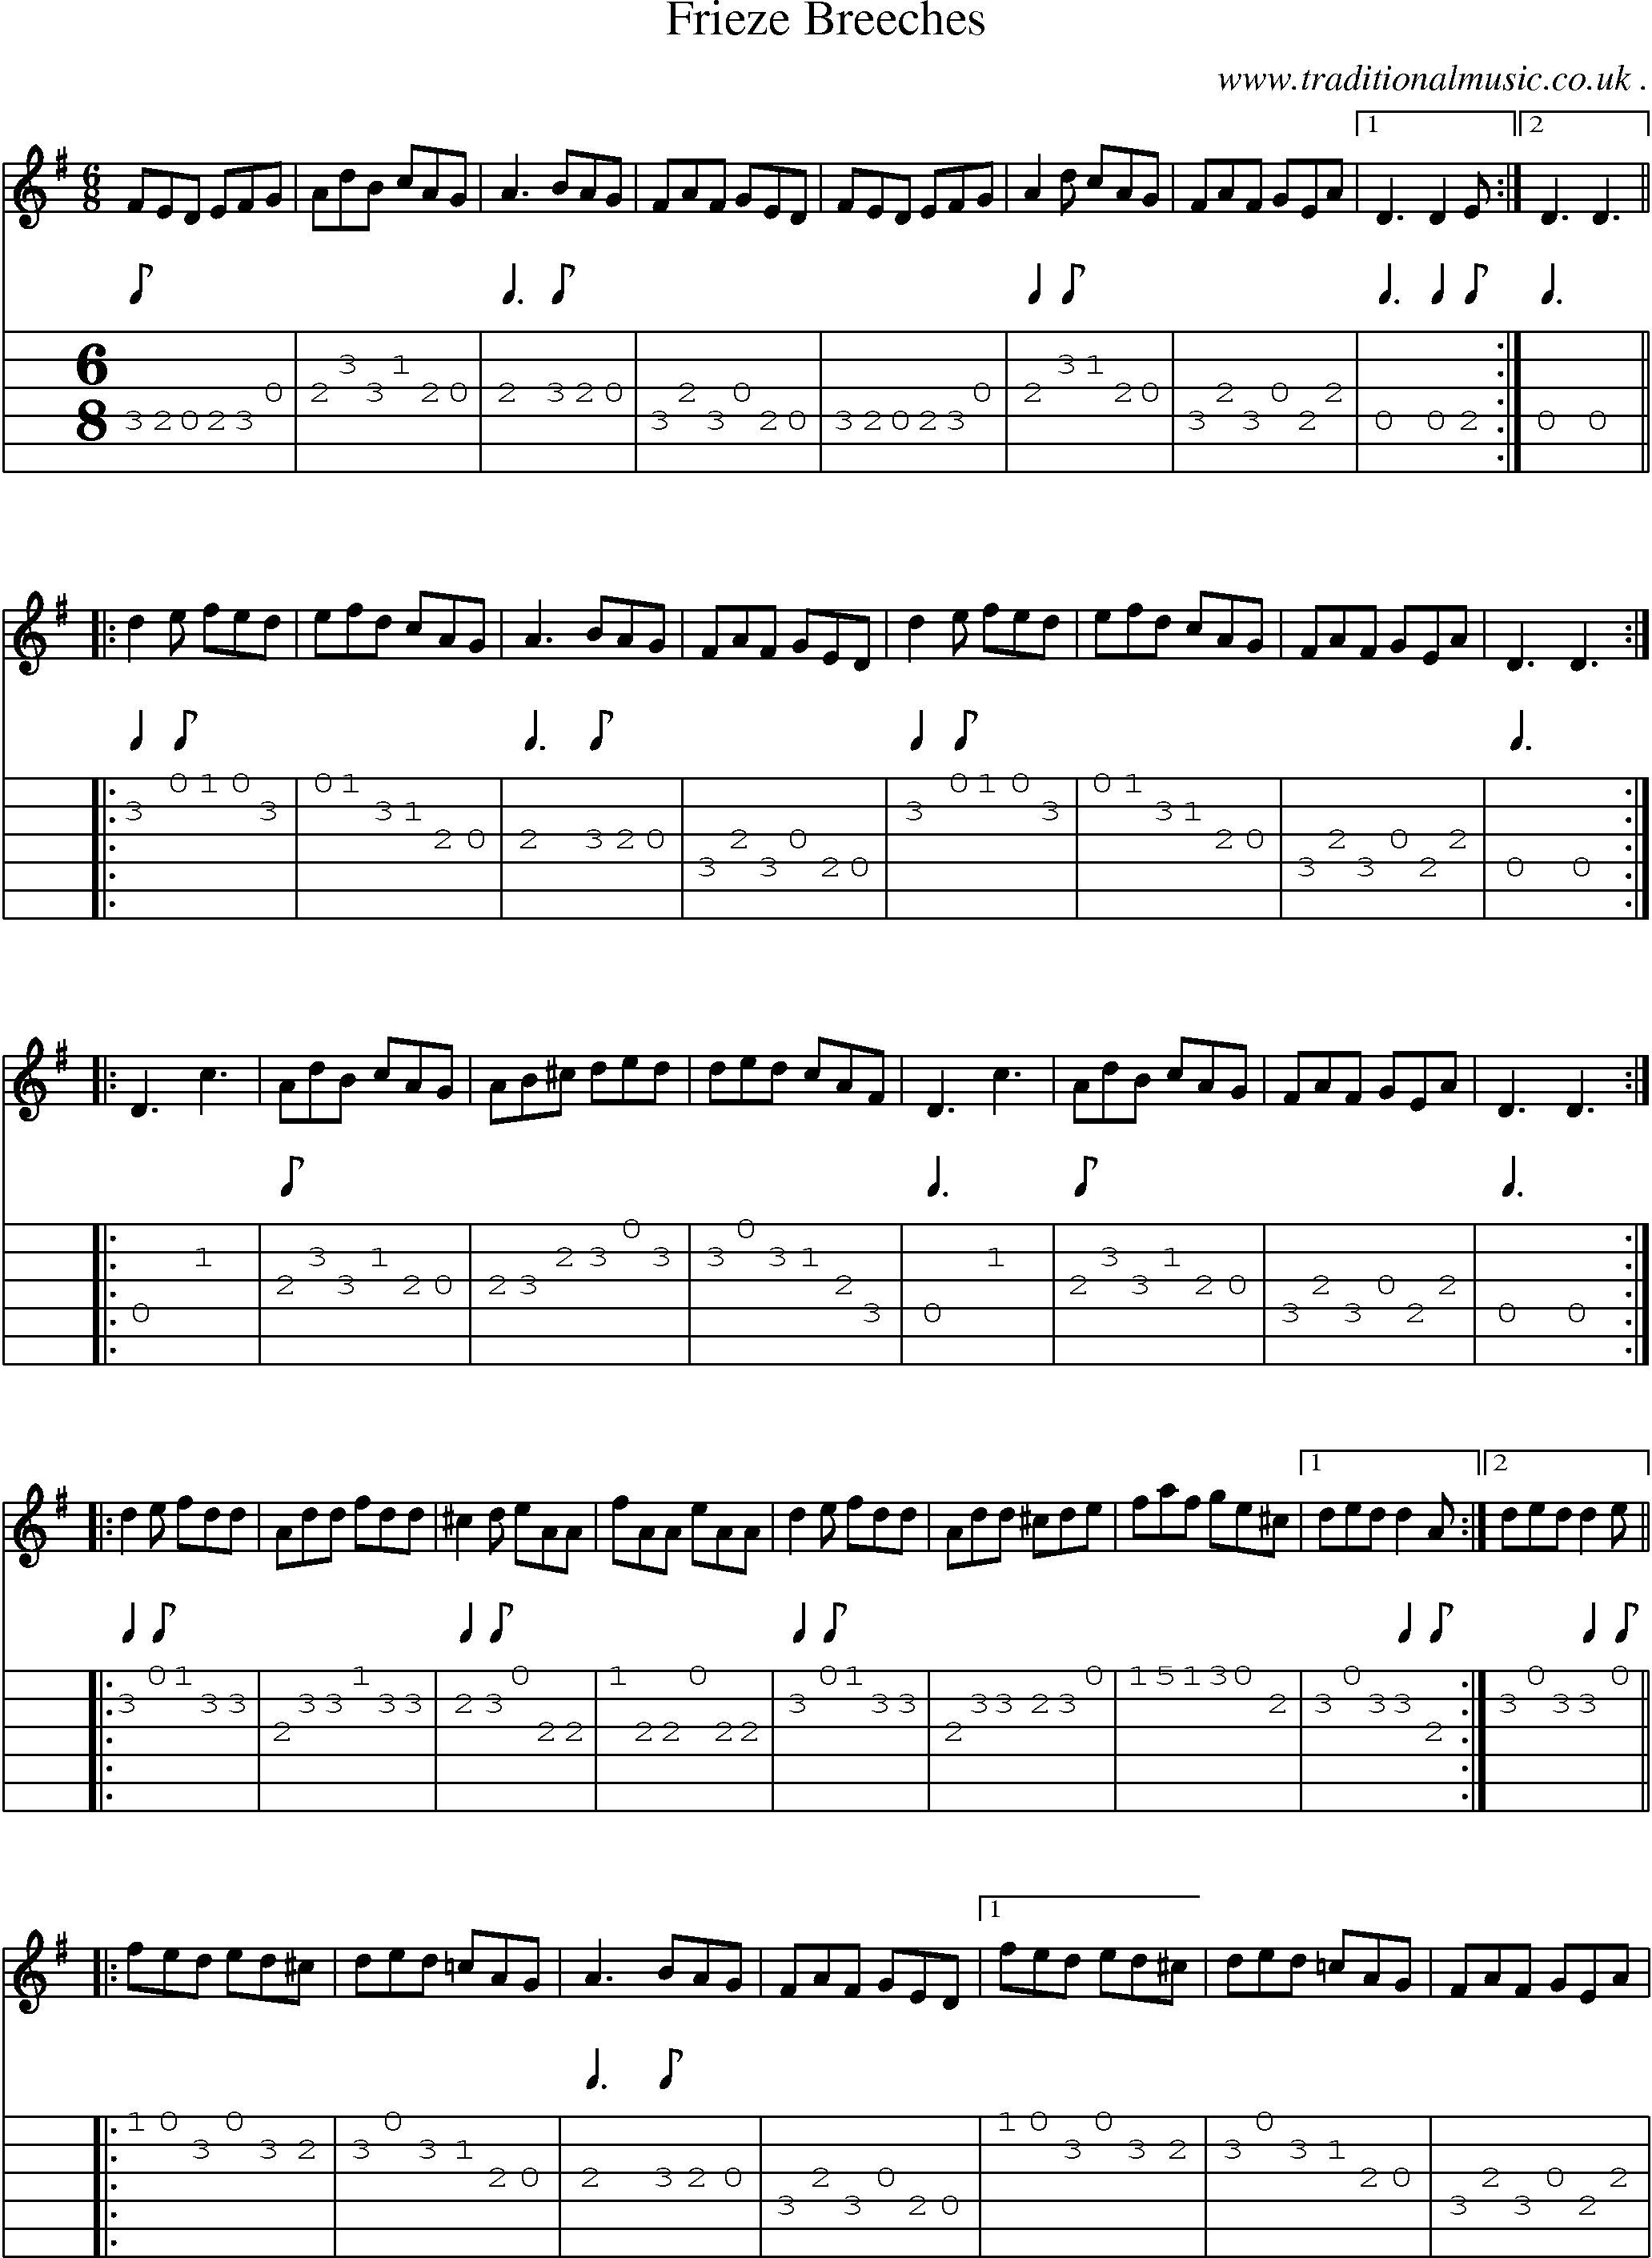 Sheet-Music and Guitar Tabs for Frieze Breeches